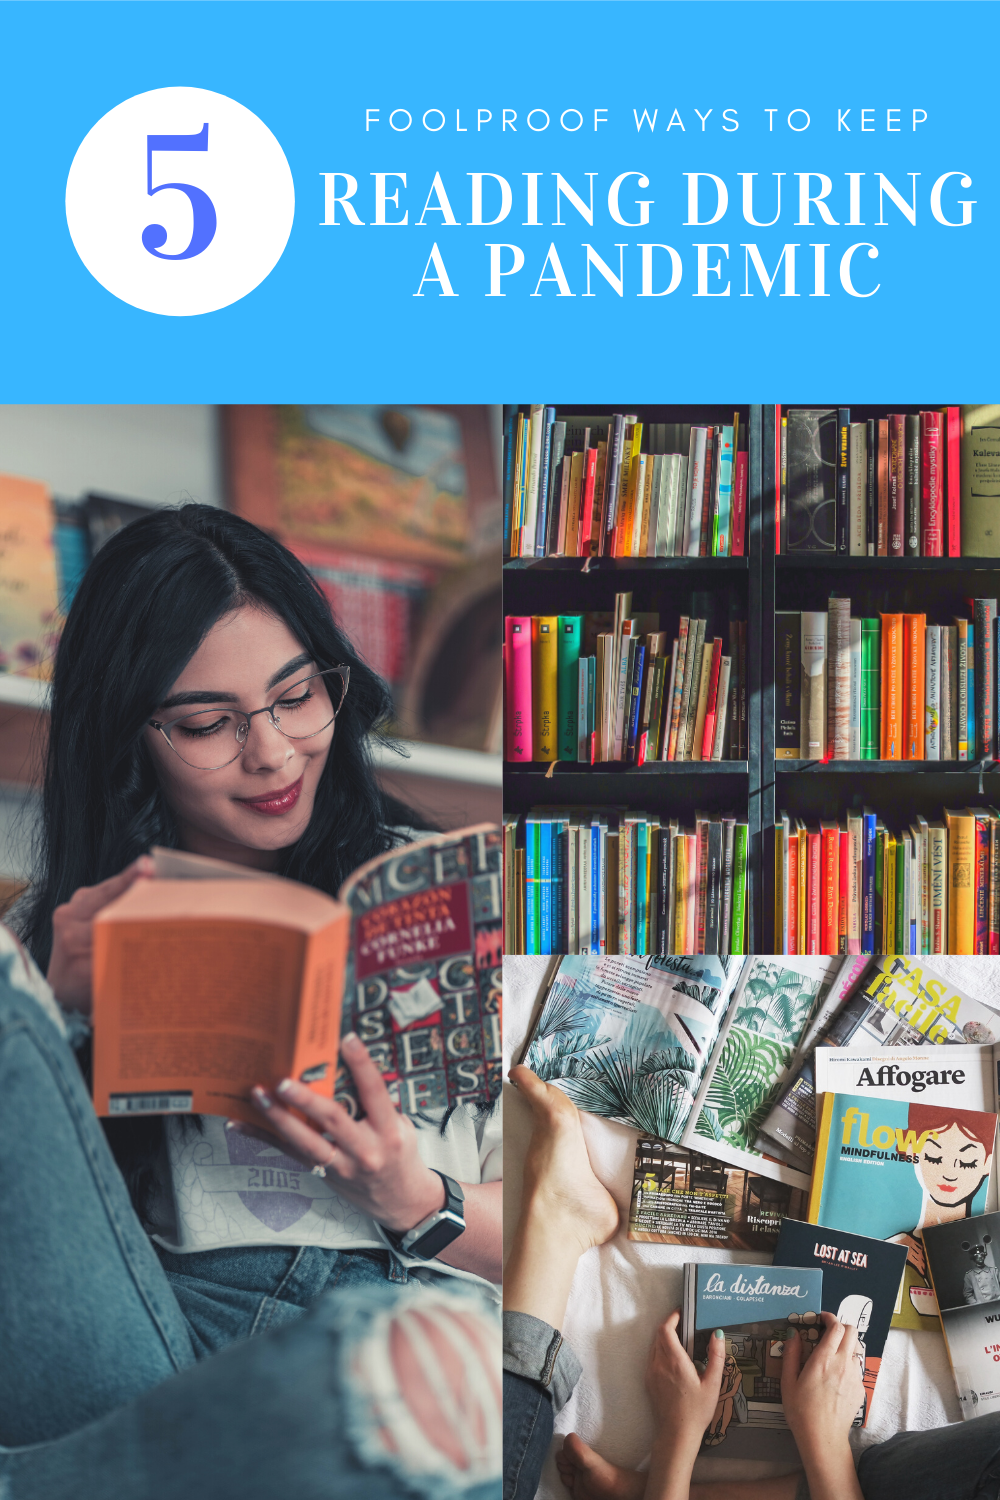 5 Foolproof Ways to Keep Reading During a Pandemic